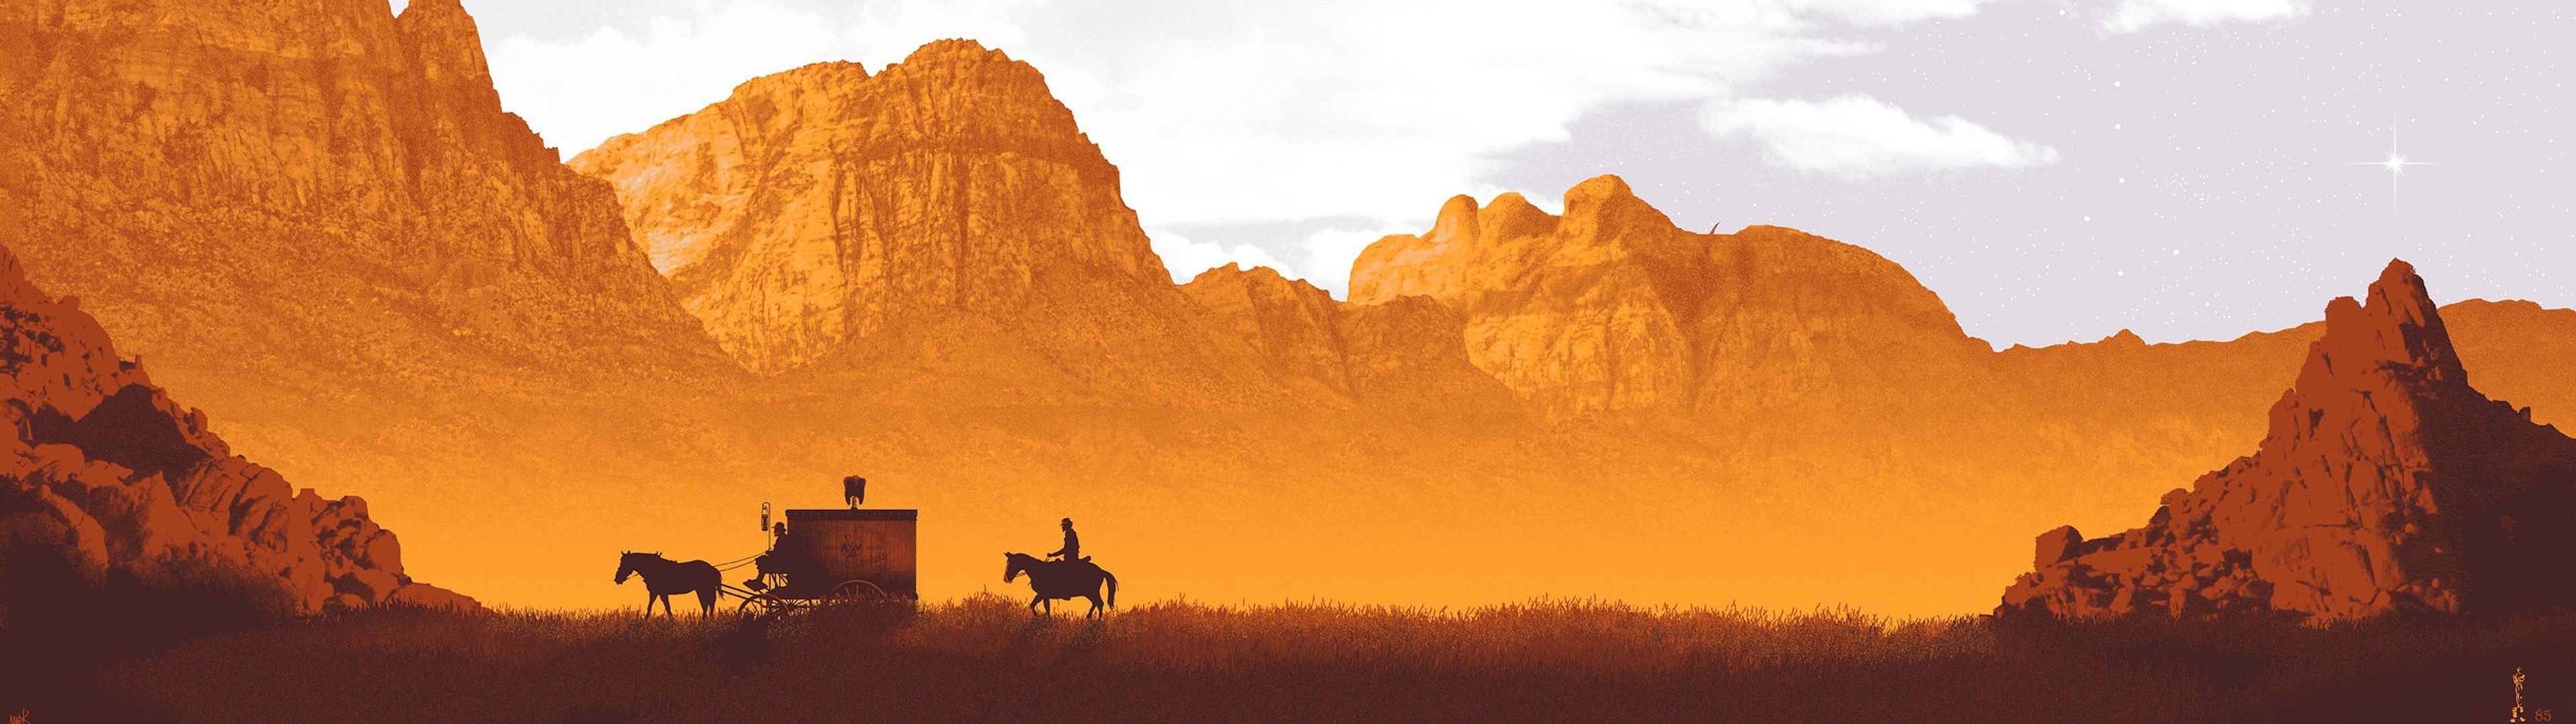 Django Unchained: Former slave-turned-hired gun teams up with a German bounty hunter to free his wife from a tyrannical plantation owner. 3840x1080 Dual Screen Wallpaper.